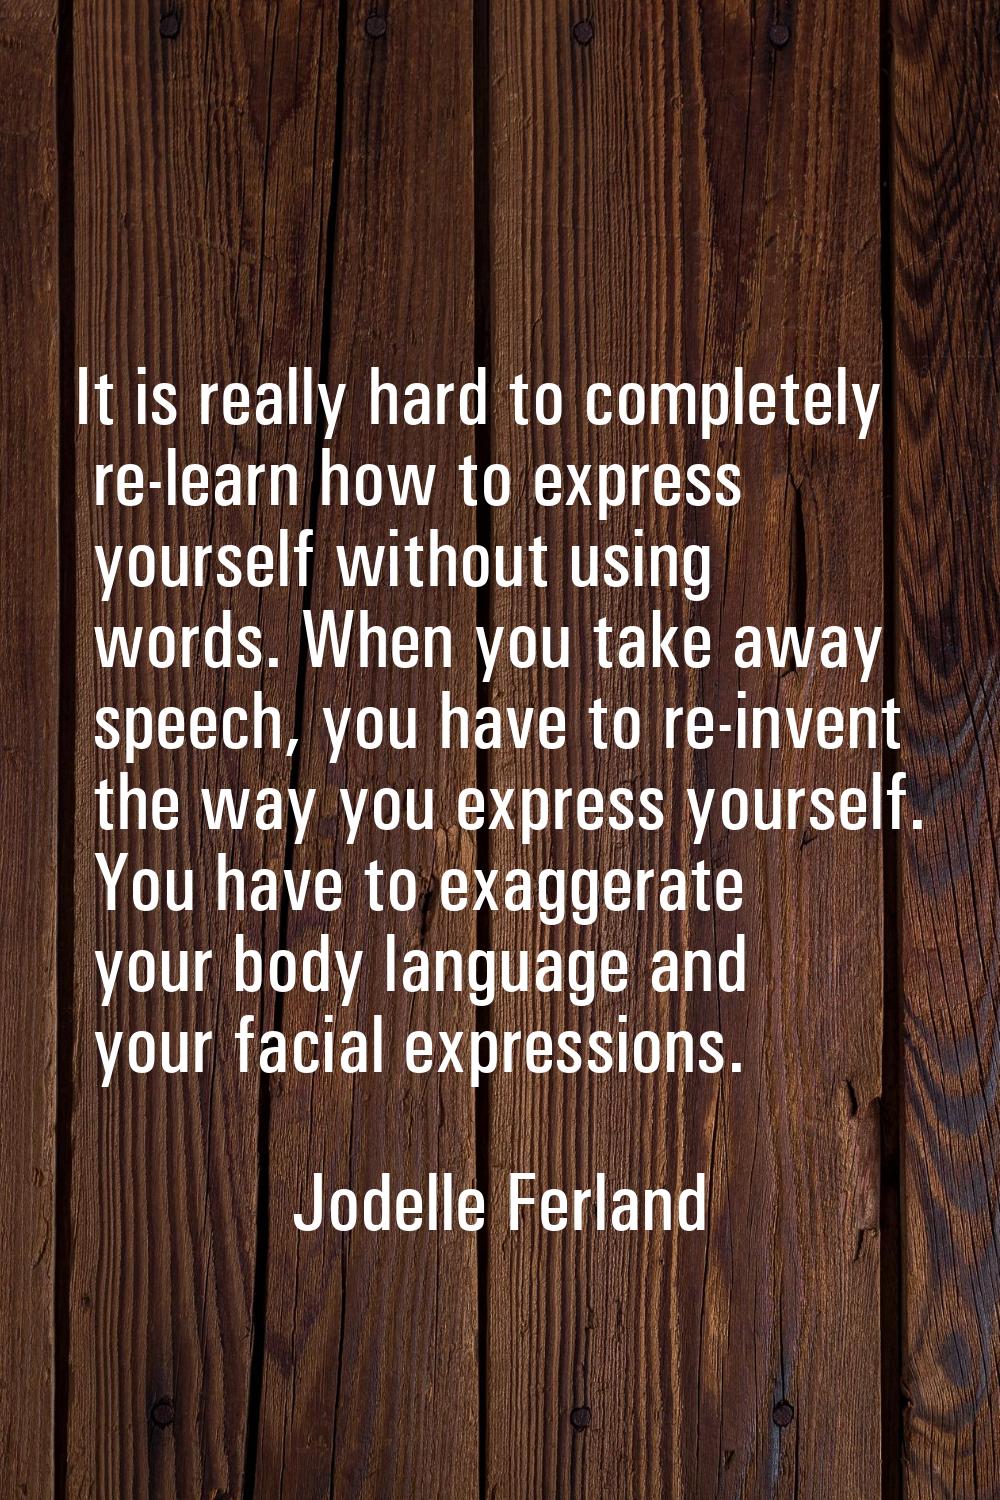 It is really hard to completely re-learn how to express yourself without using words. When you take